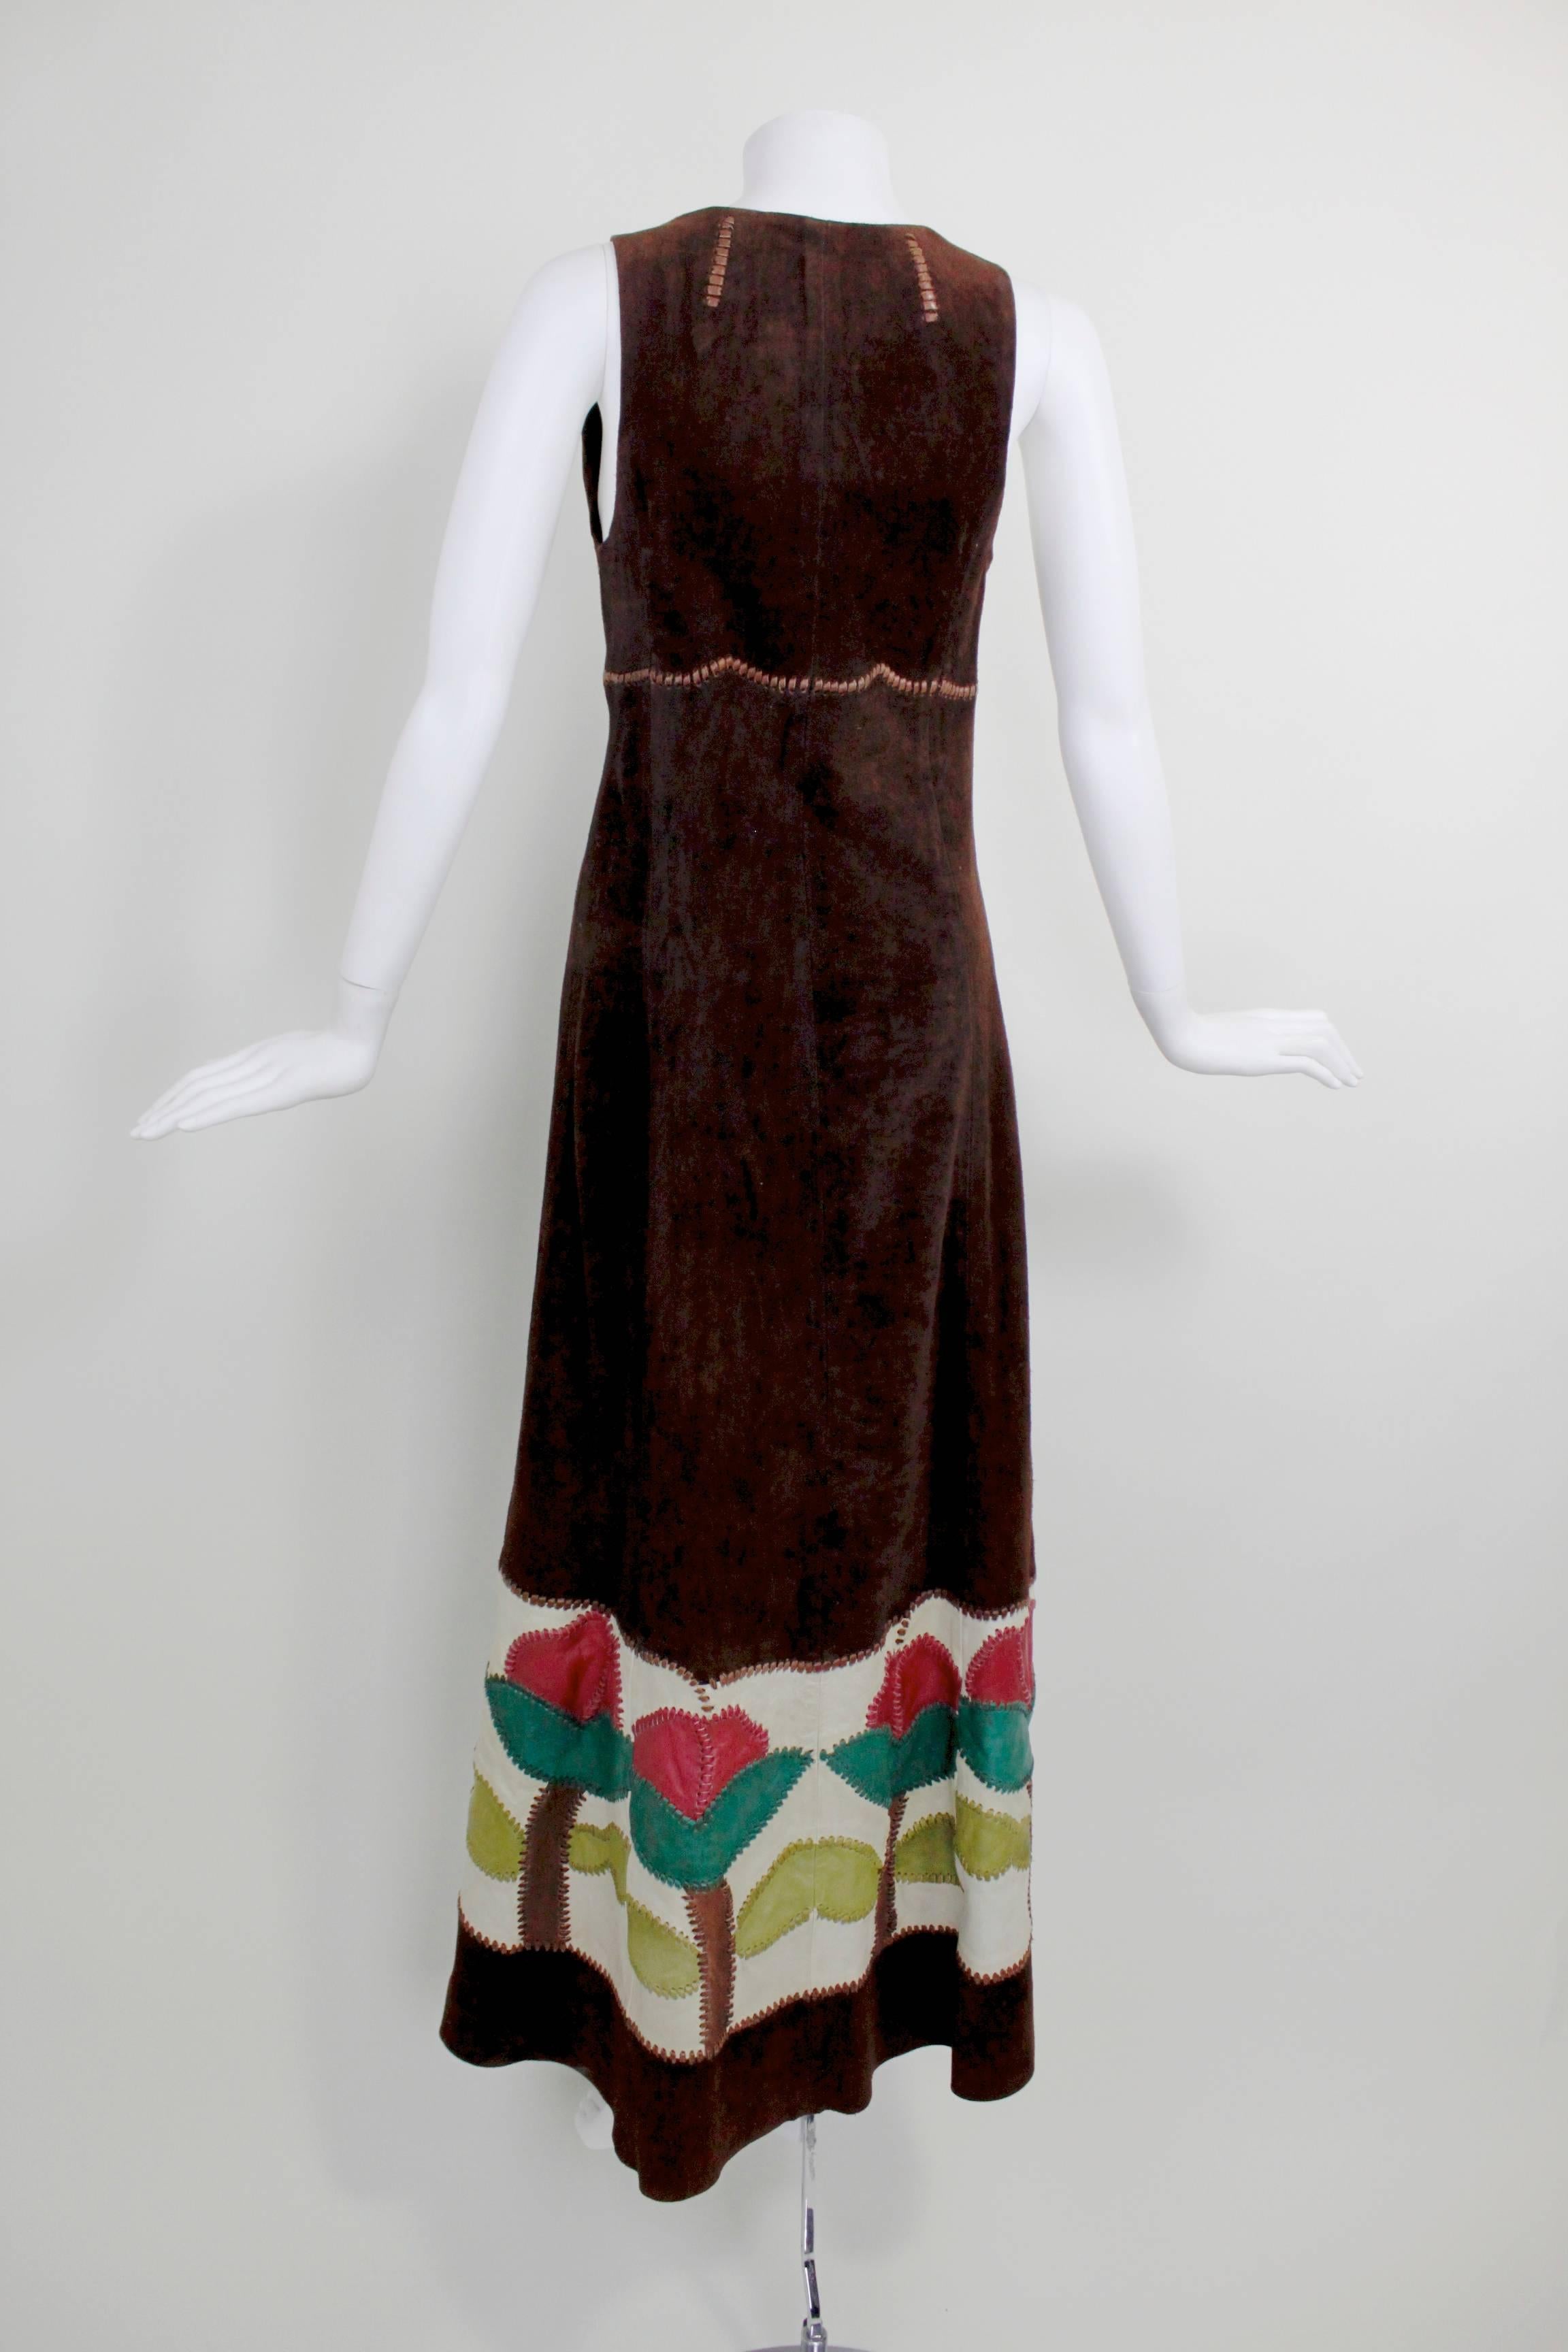 Women's 1970s Char Suede Vest with Patchwork Appliqué and Leather Binding